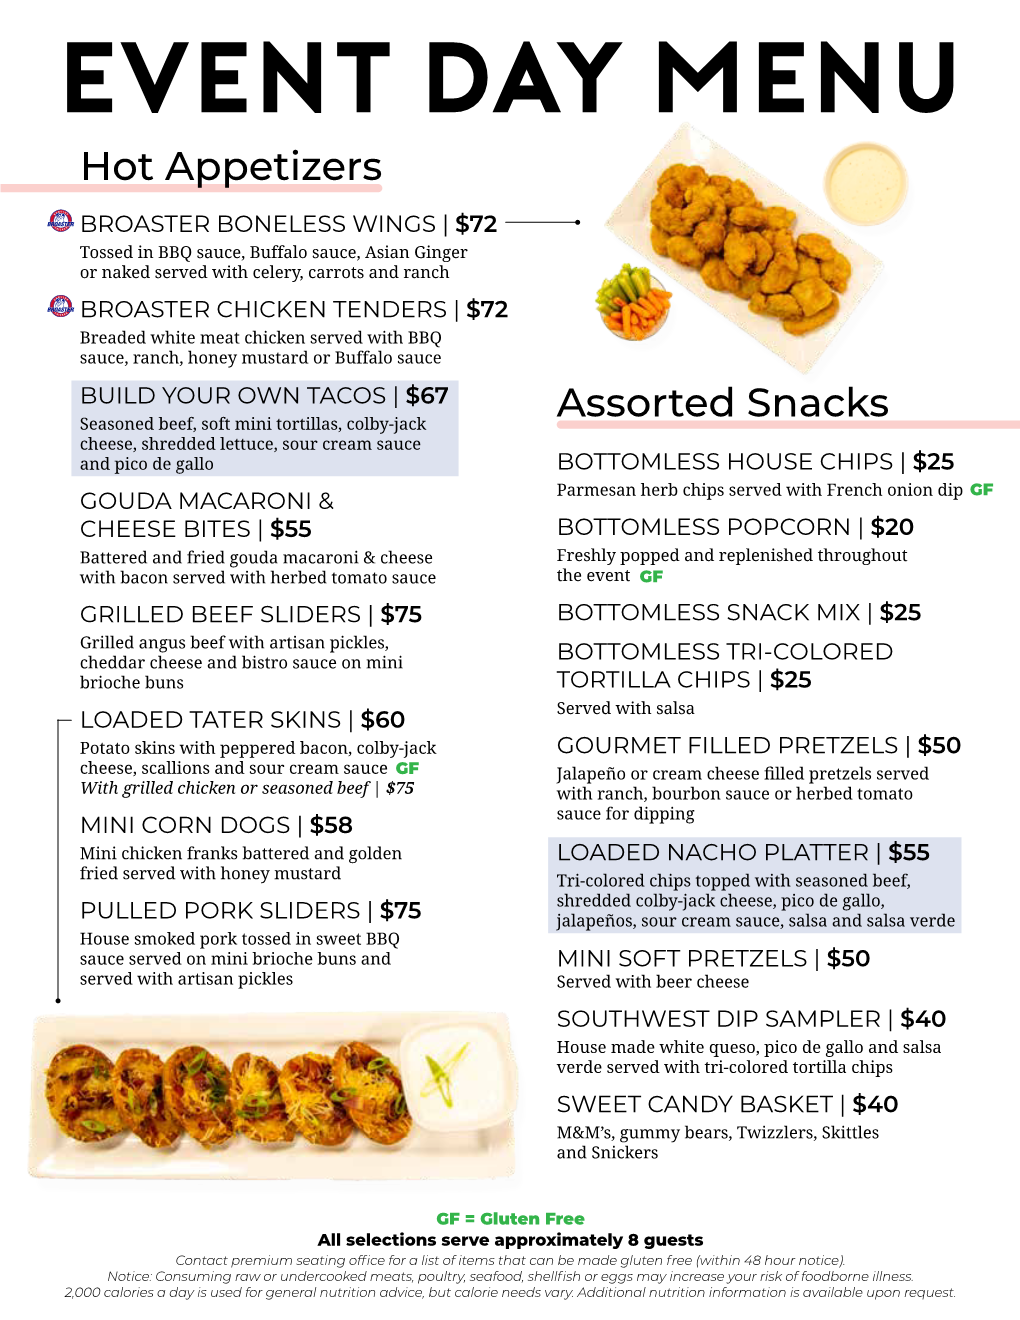 EVENT DAY MENU Hot Appetizers